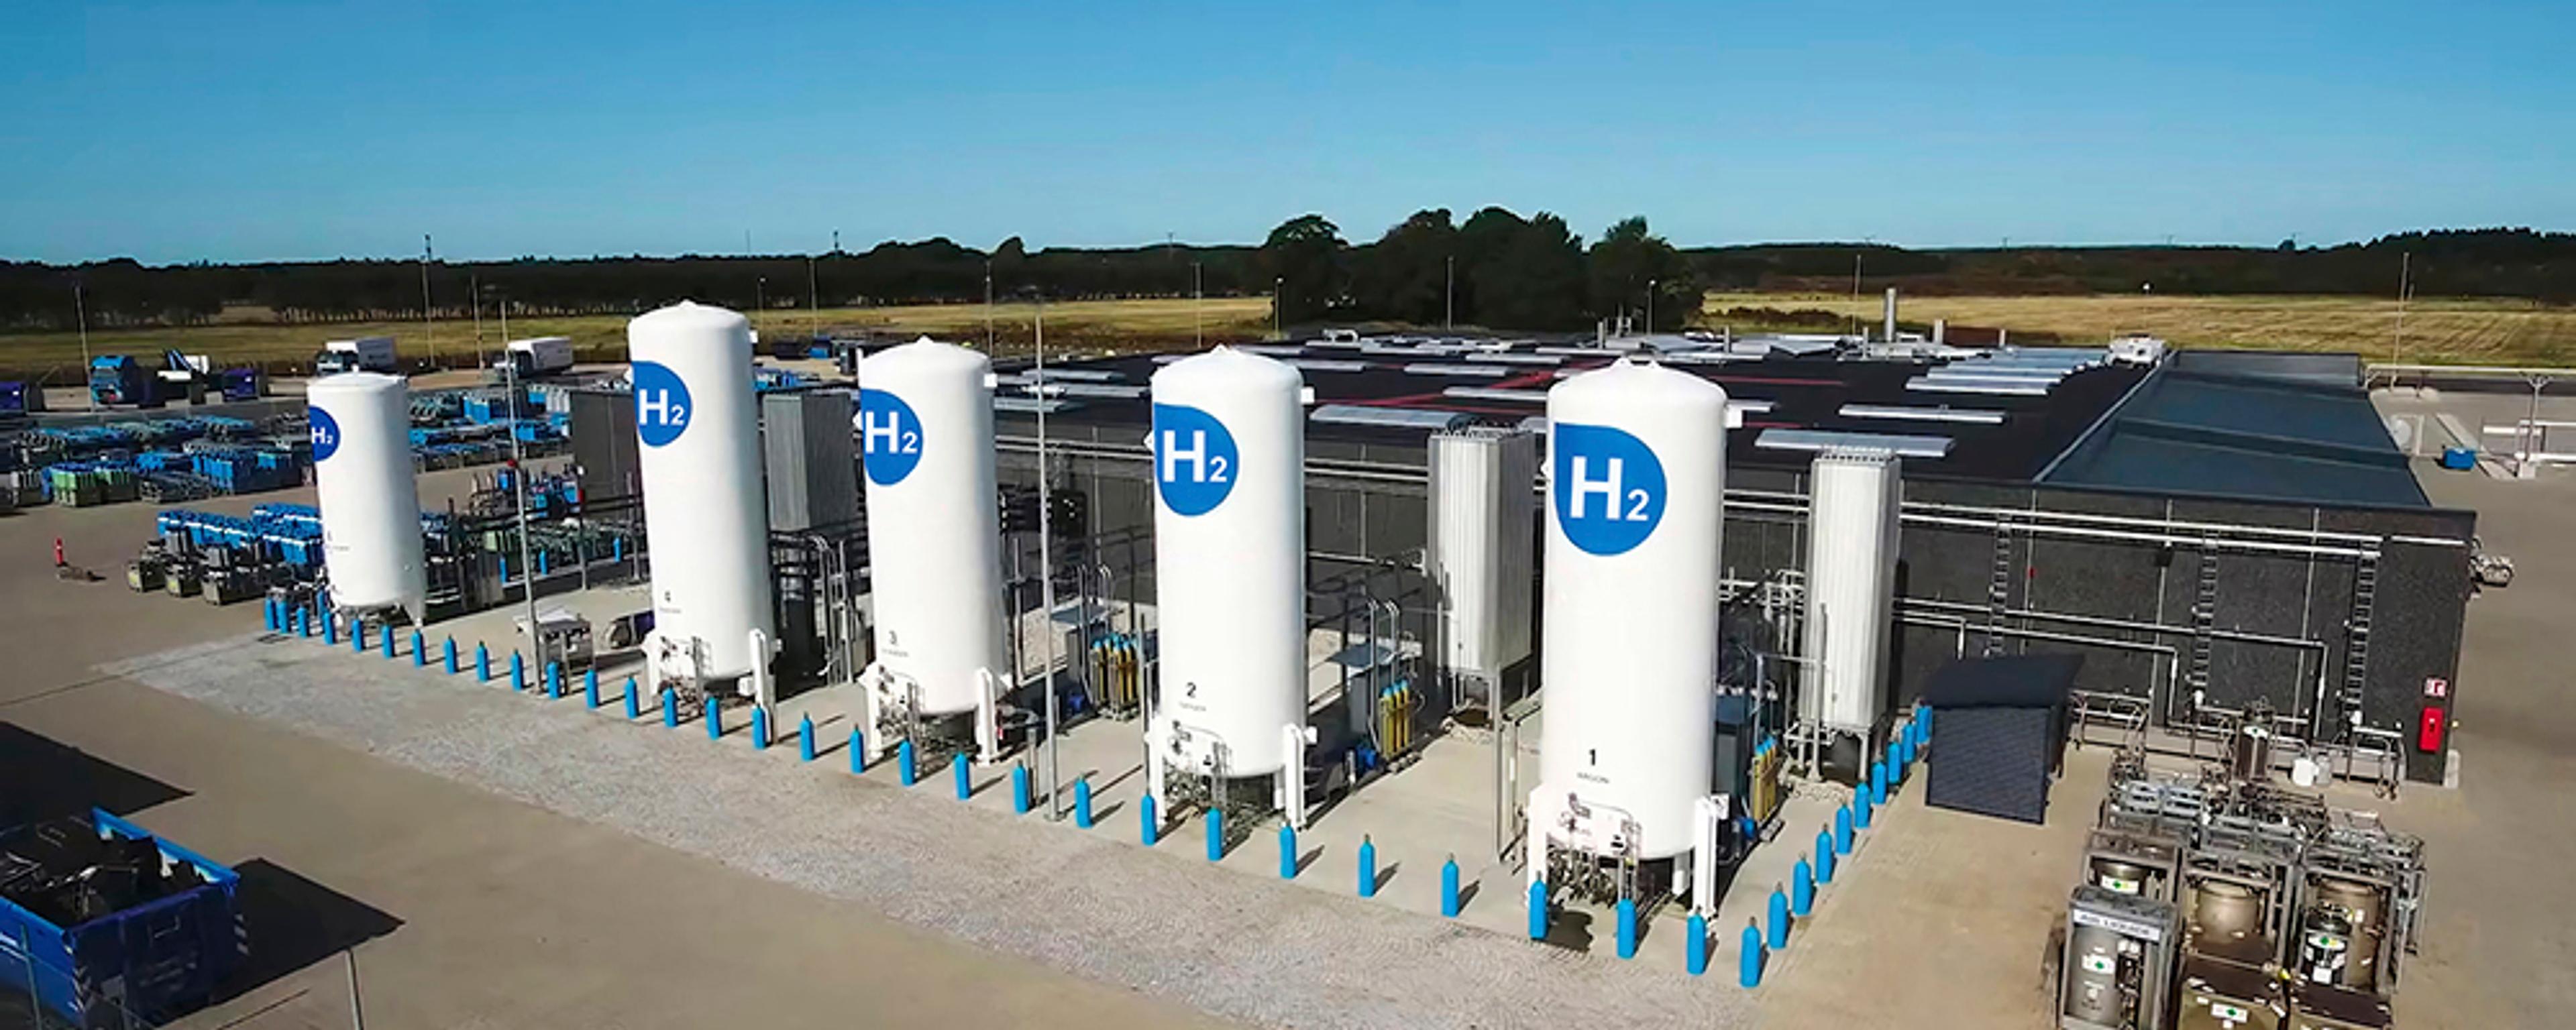 The Hydrogen Hubs Conundrum: How to Fund an Ecosystem